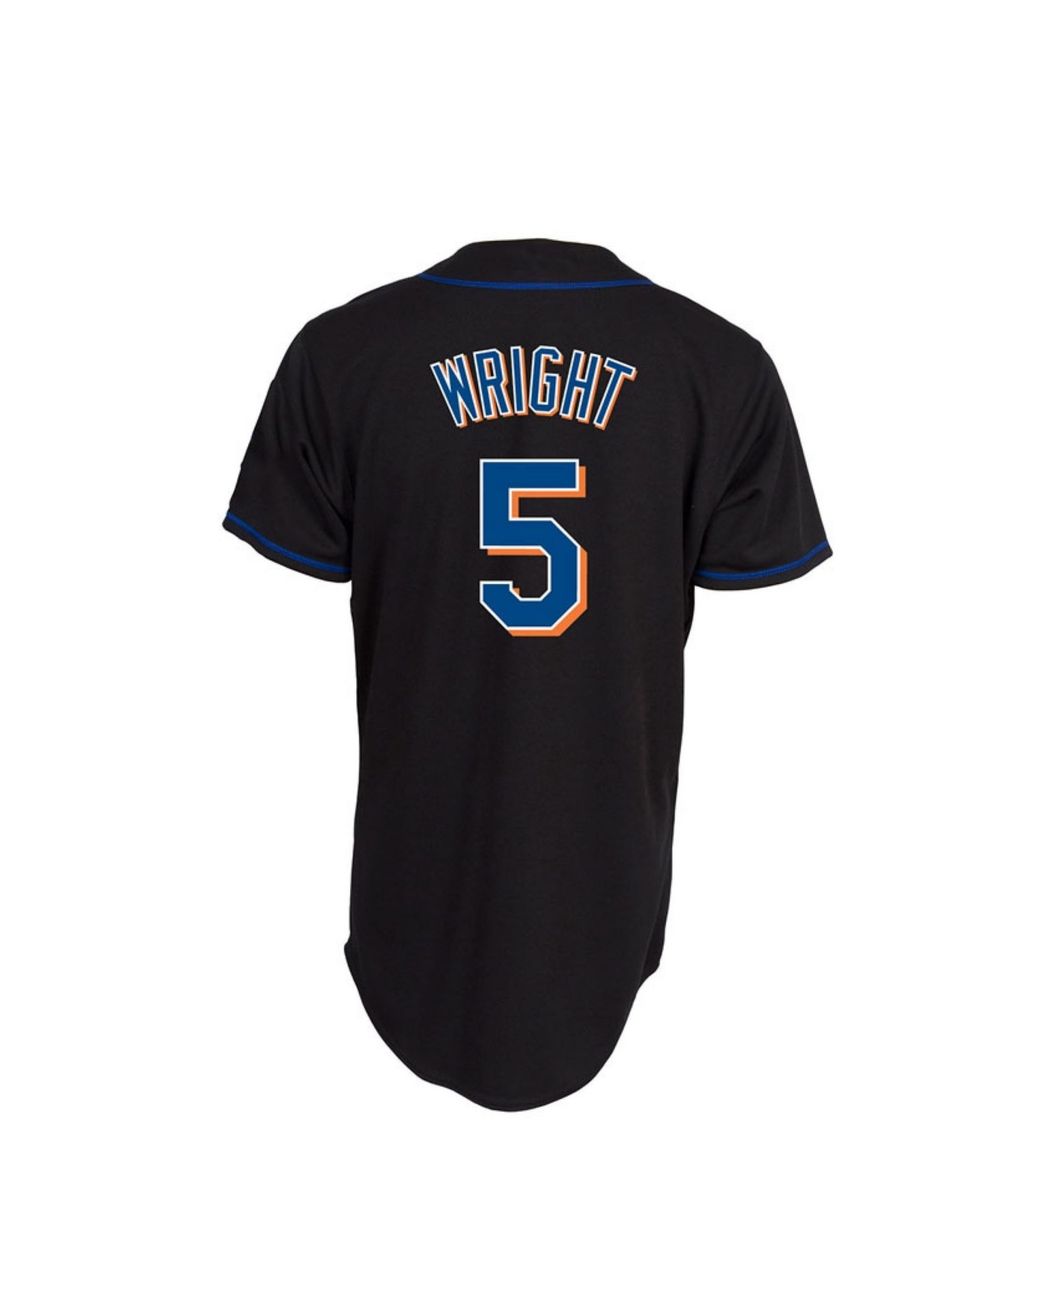 Majestic AUTHENTIC SIZE 50 2XL NEW YORK METS BLACK DAVID WRIGHT COOL BASE  Jersey